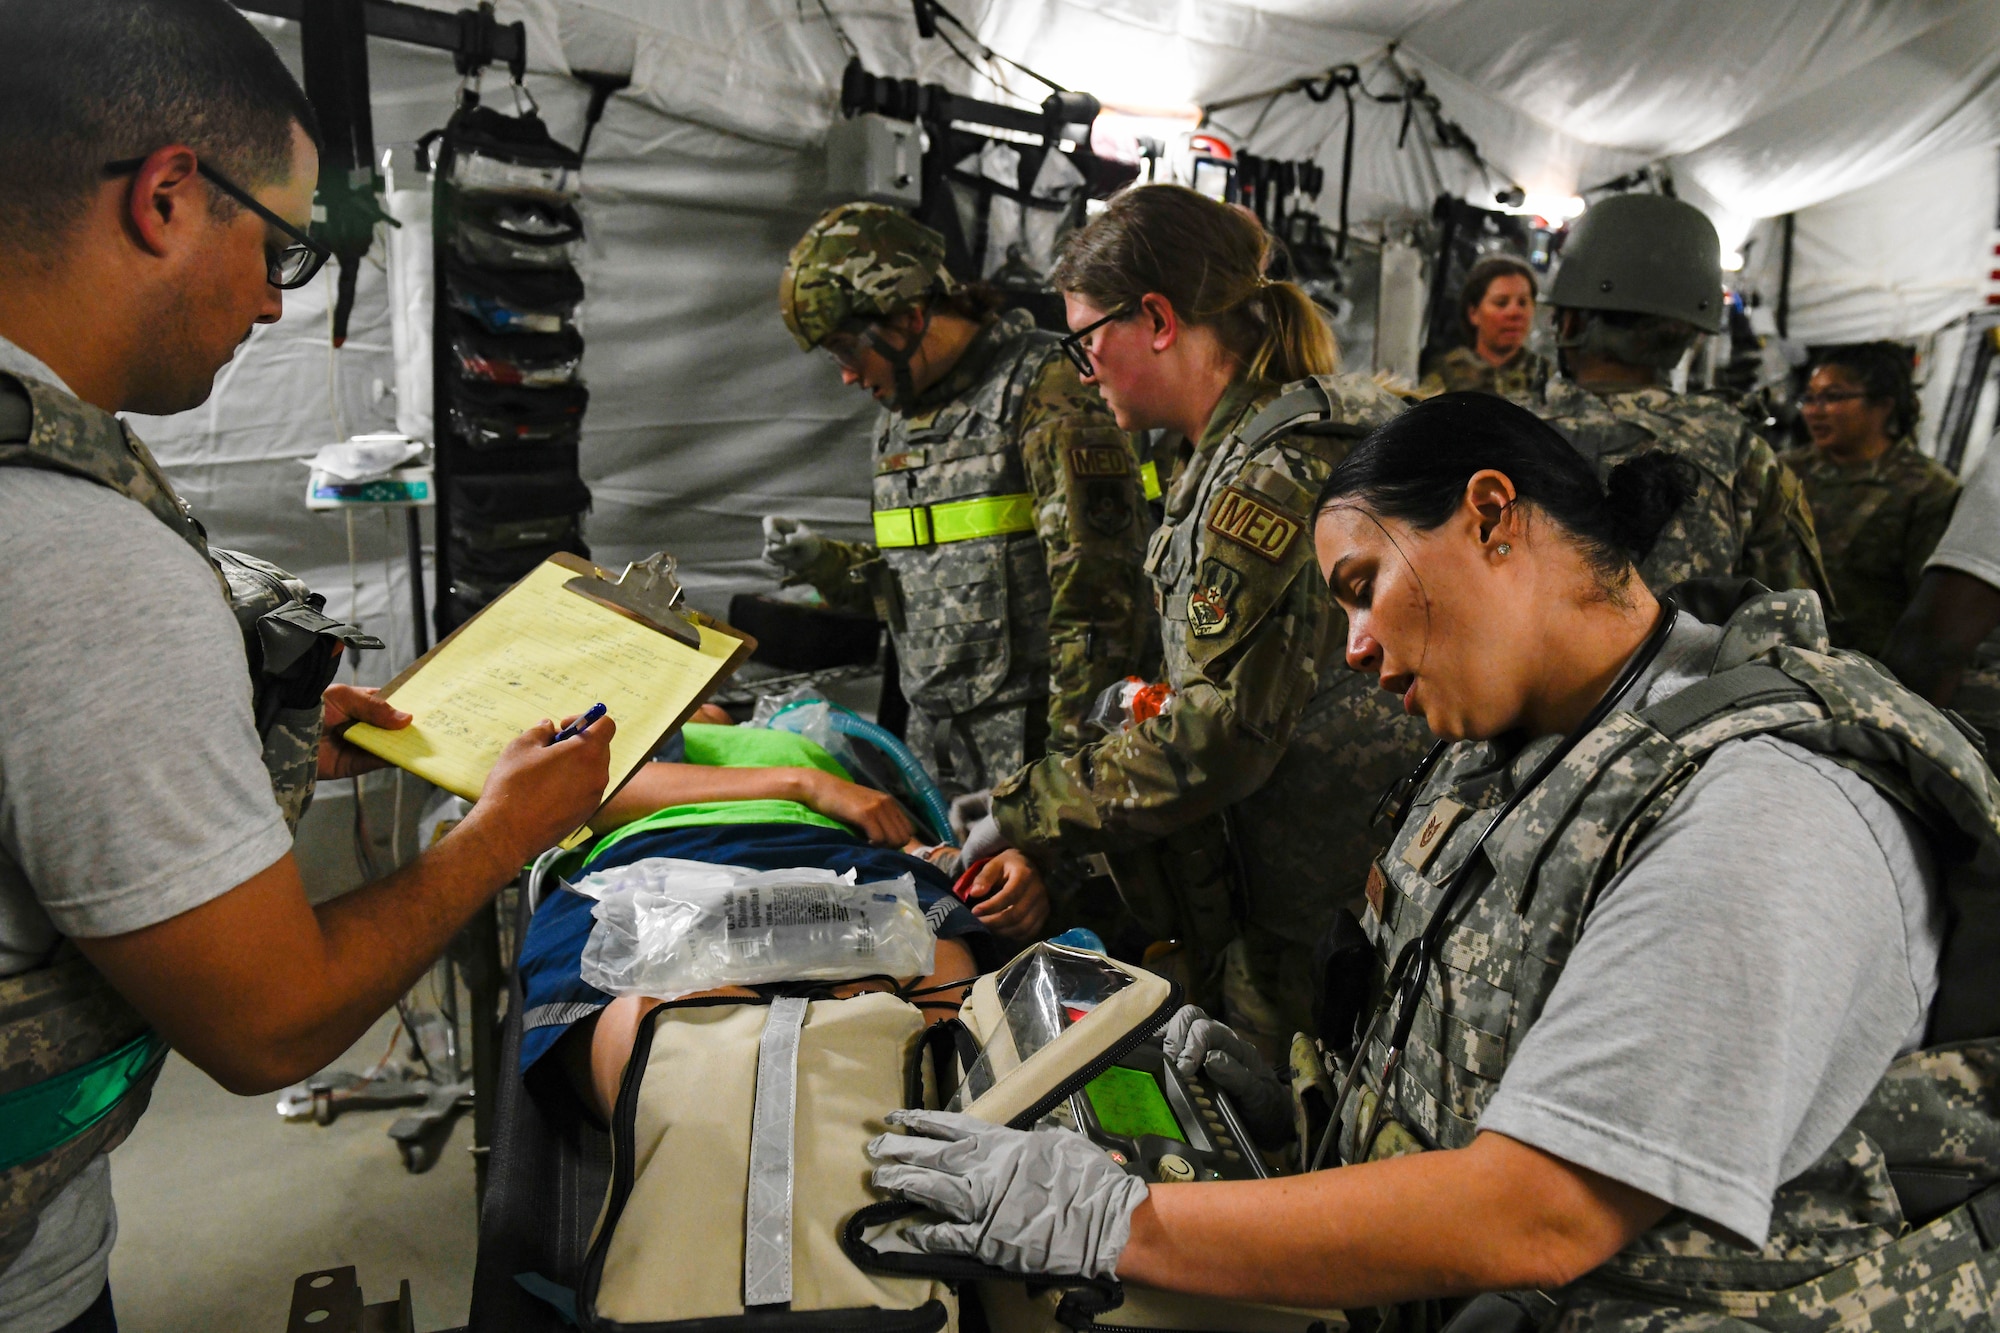 378th medical partnerships sustain life and mission